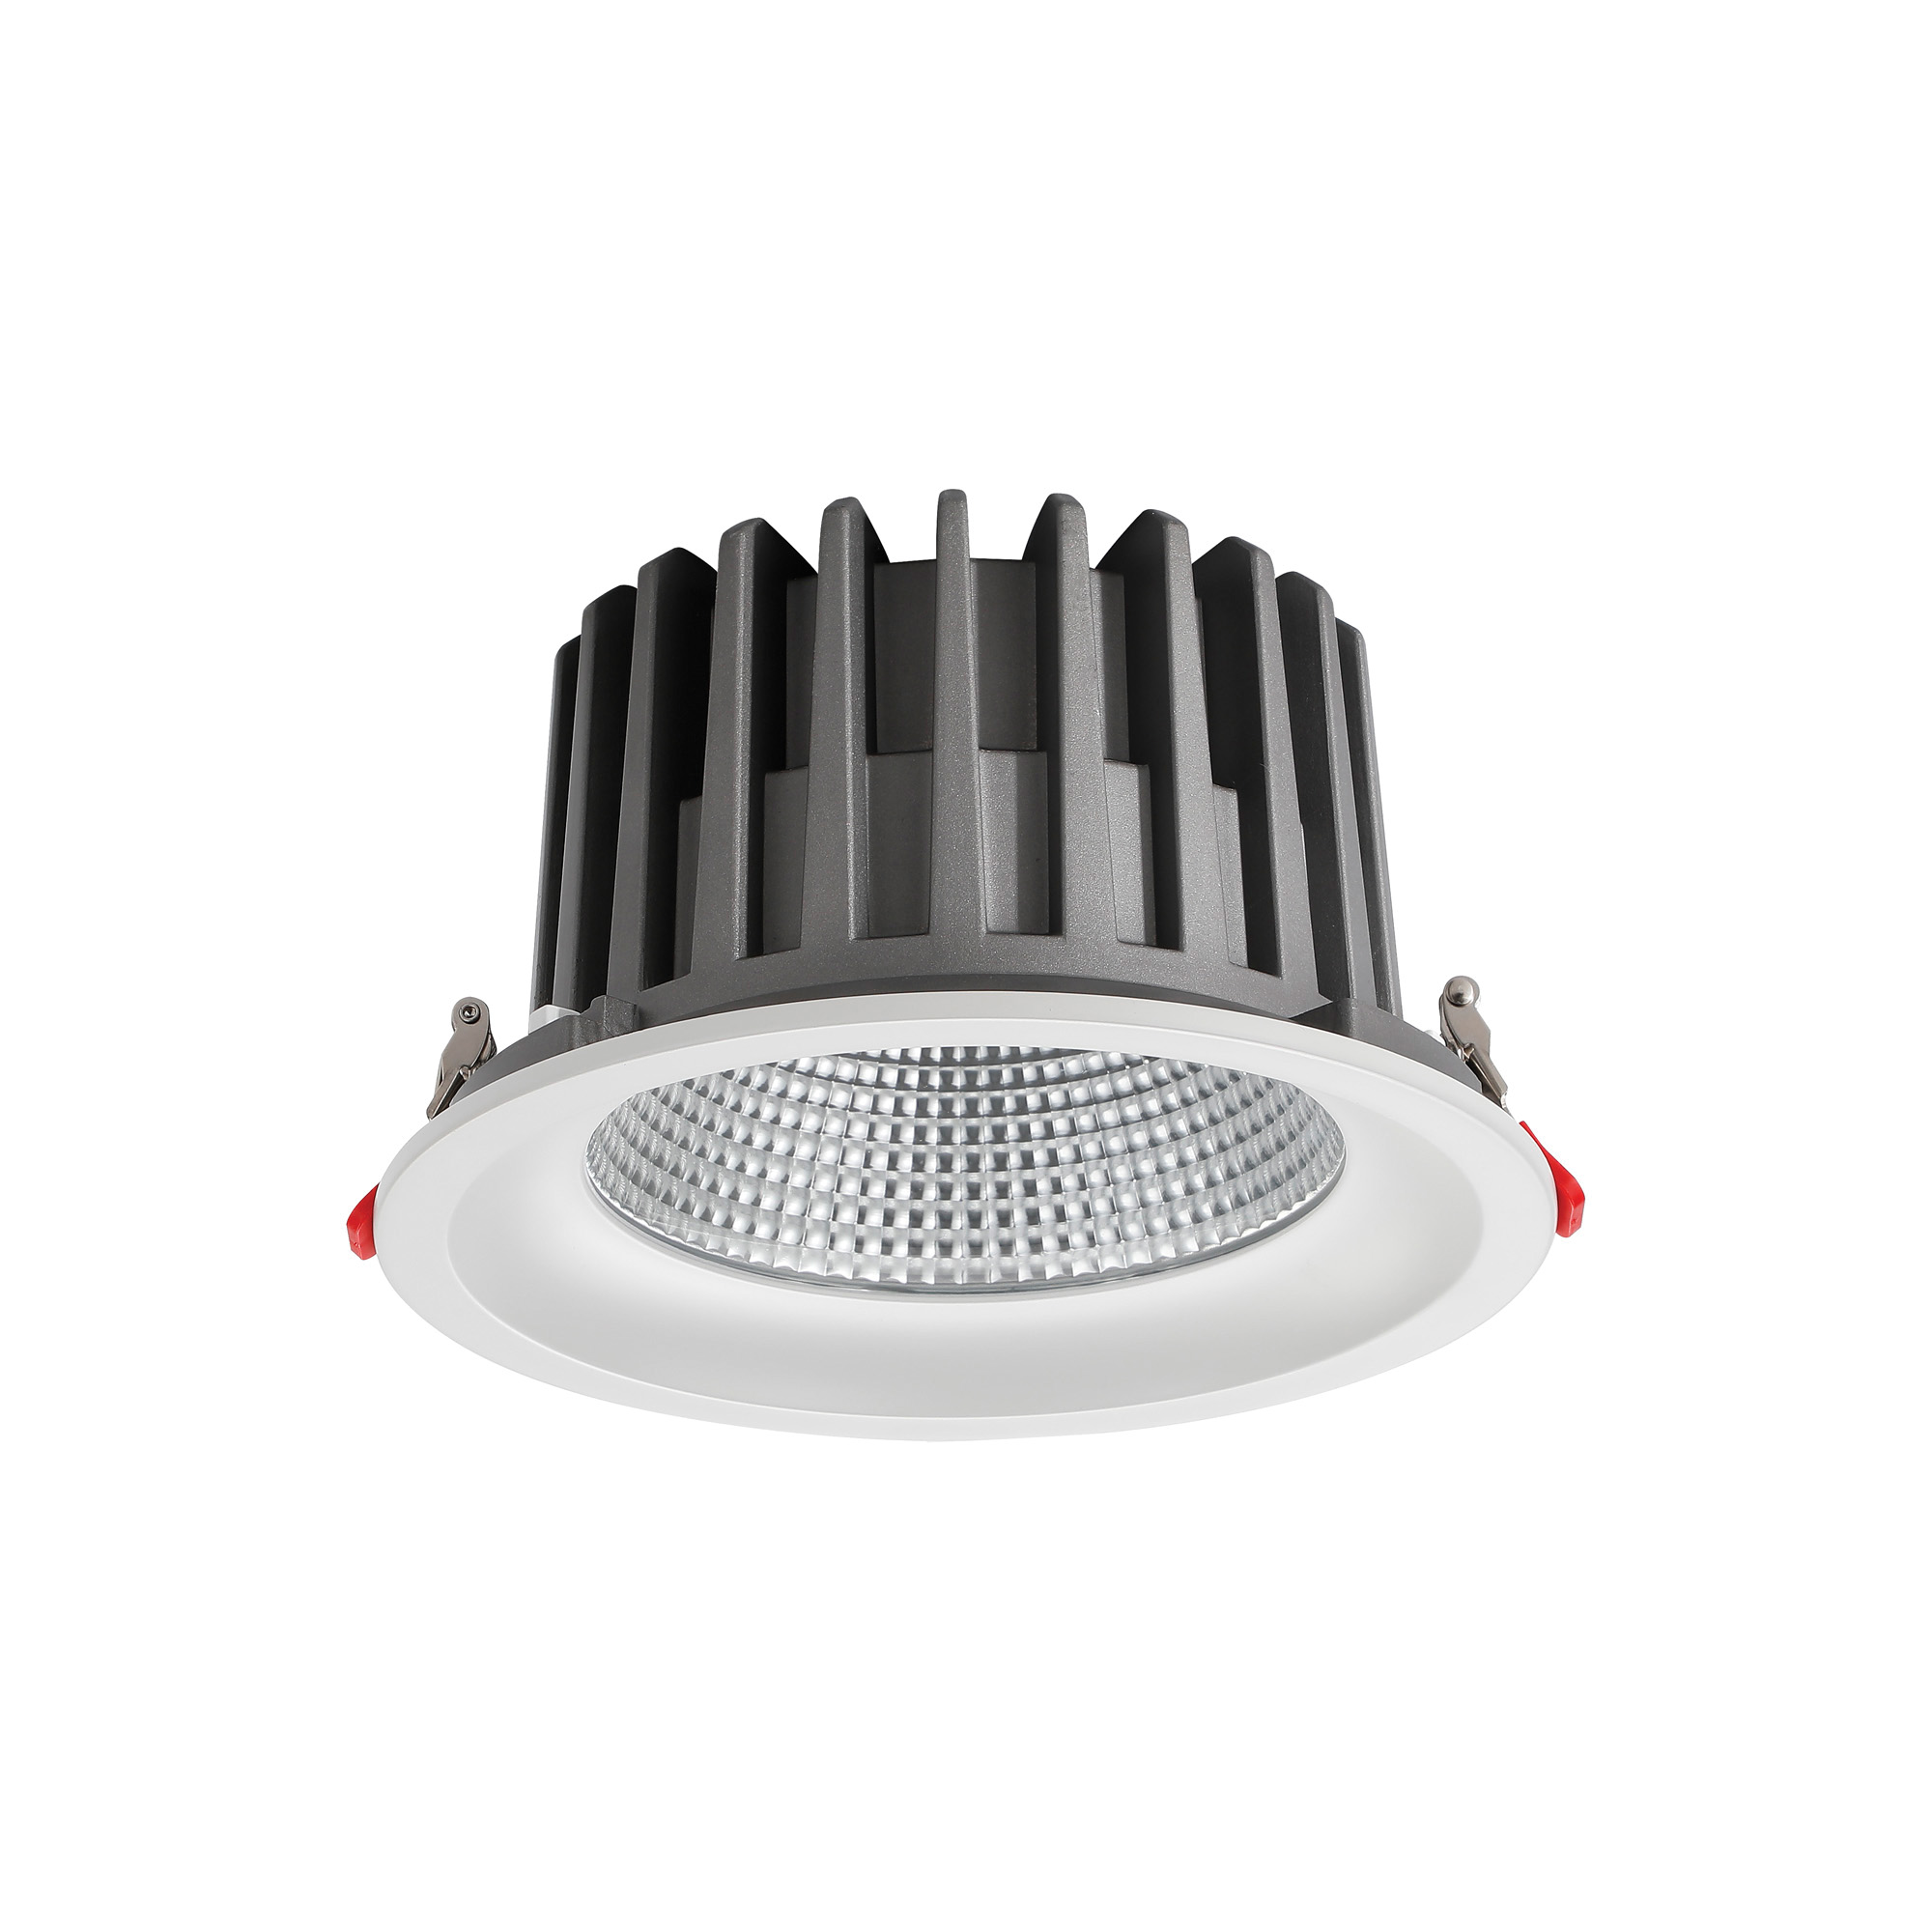 DL200069  Bionic 50, 50W, 1200mA, White Deep Round Recessed Downlight, 4500lm ,Cut Out 175mm, 50° , 5000K, IP44, DRIVER INC., 5yrs Warranty.